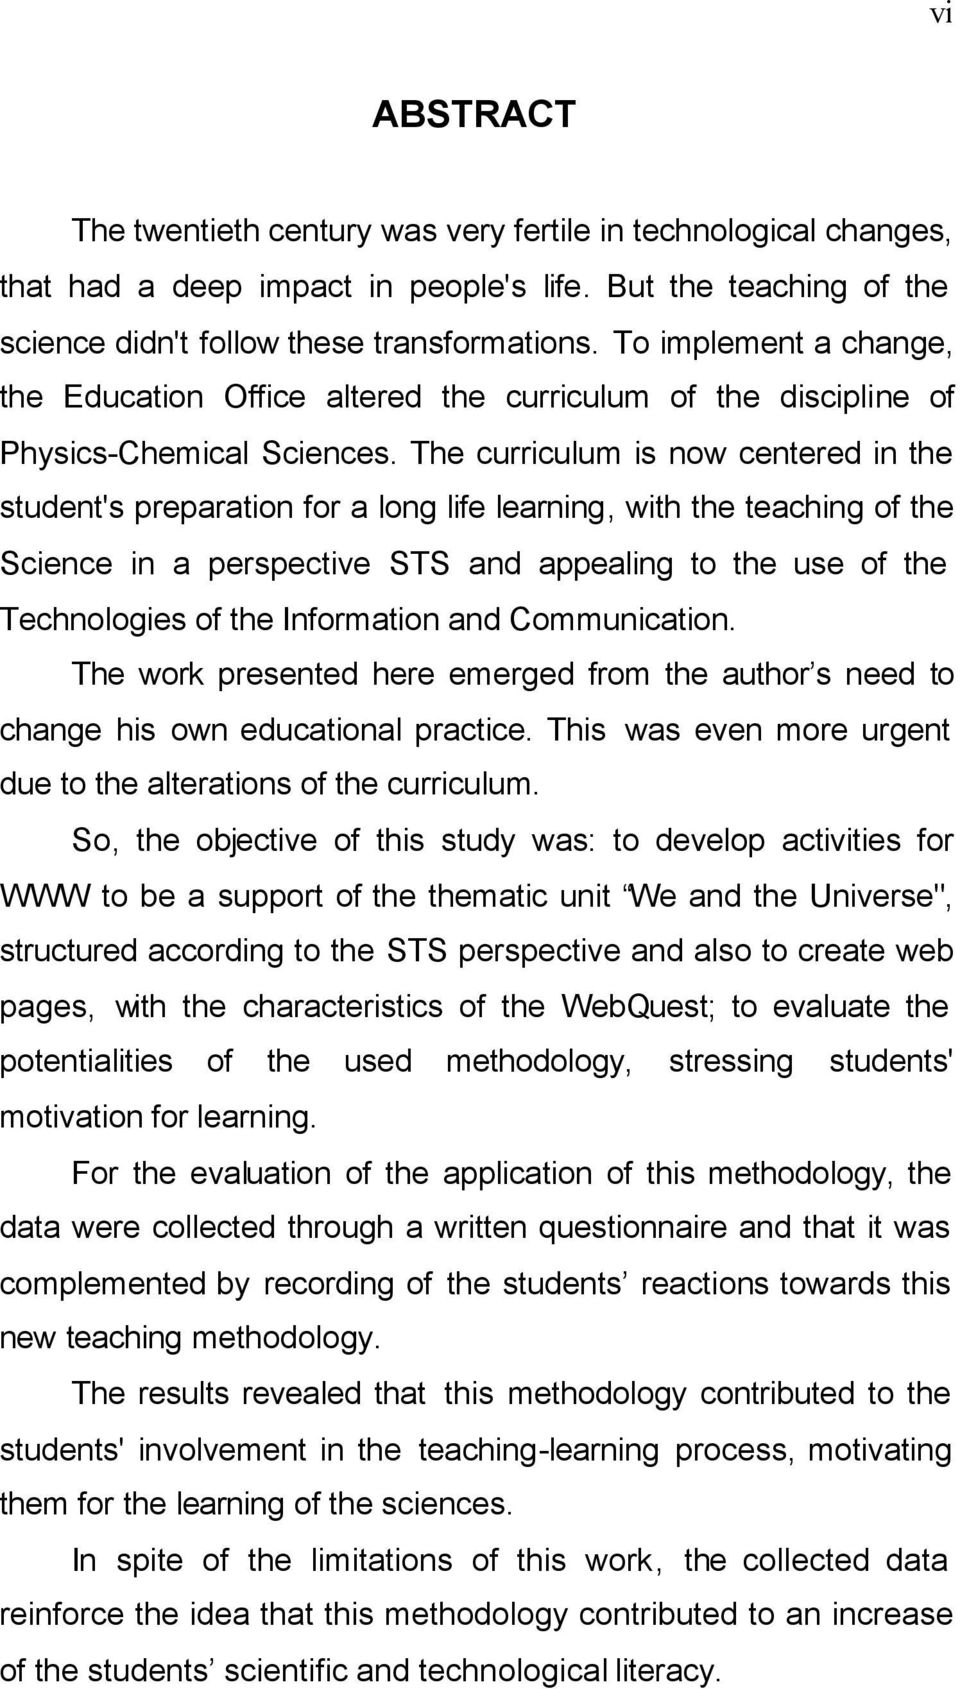 The curriculum is now centered in the student's preparation for a long life learning, with the teaching of the Science in a perspective STS and appealing to the use of the Technologies of the